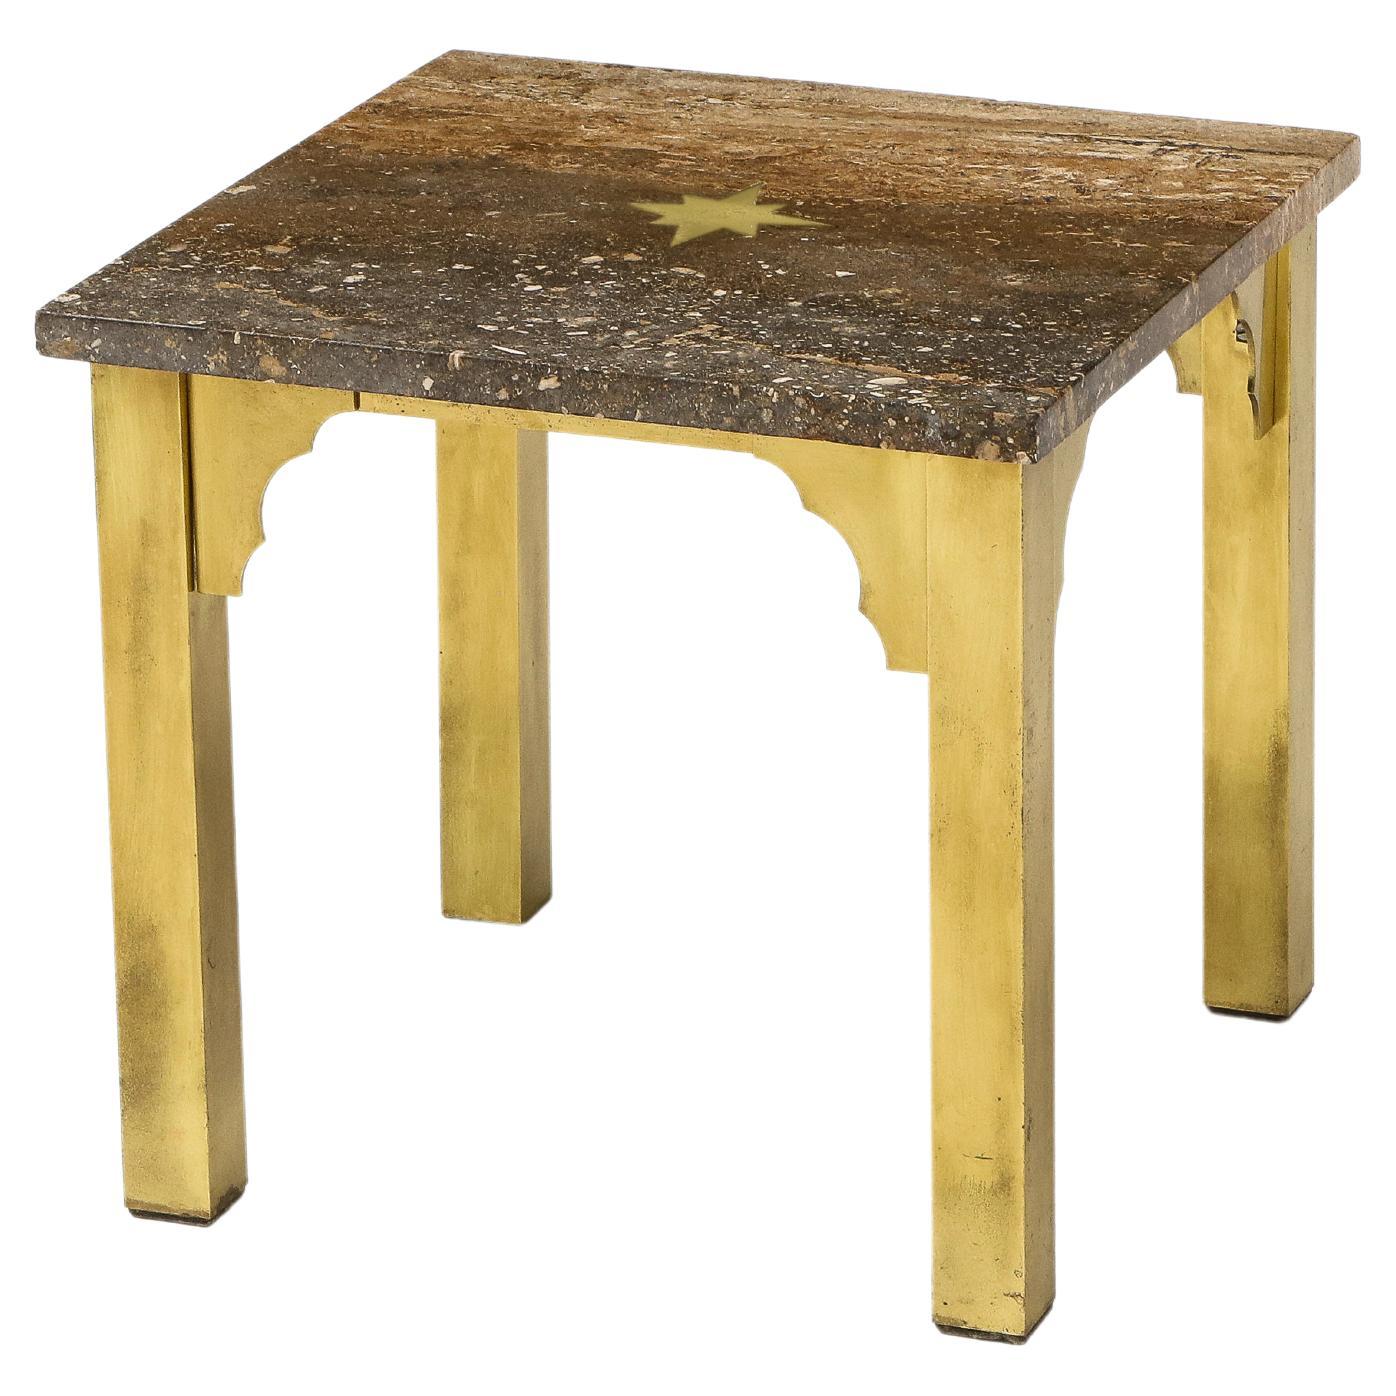 Small Square Table in Brass & Travertine, Inlay & Arabesque Details, USA 1960's For Sale